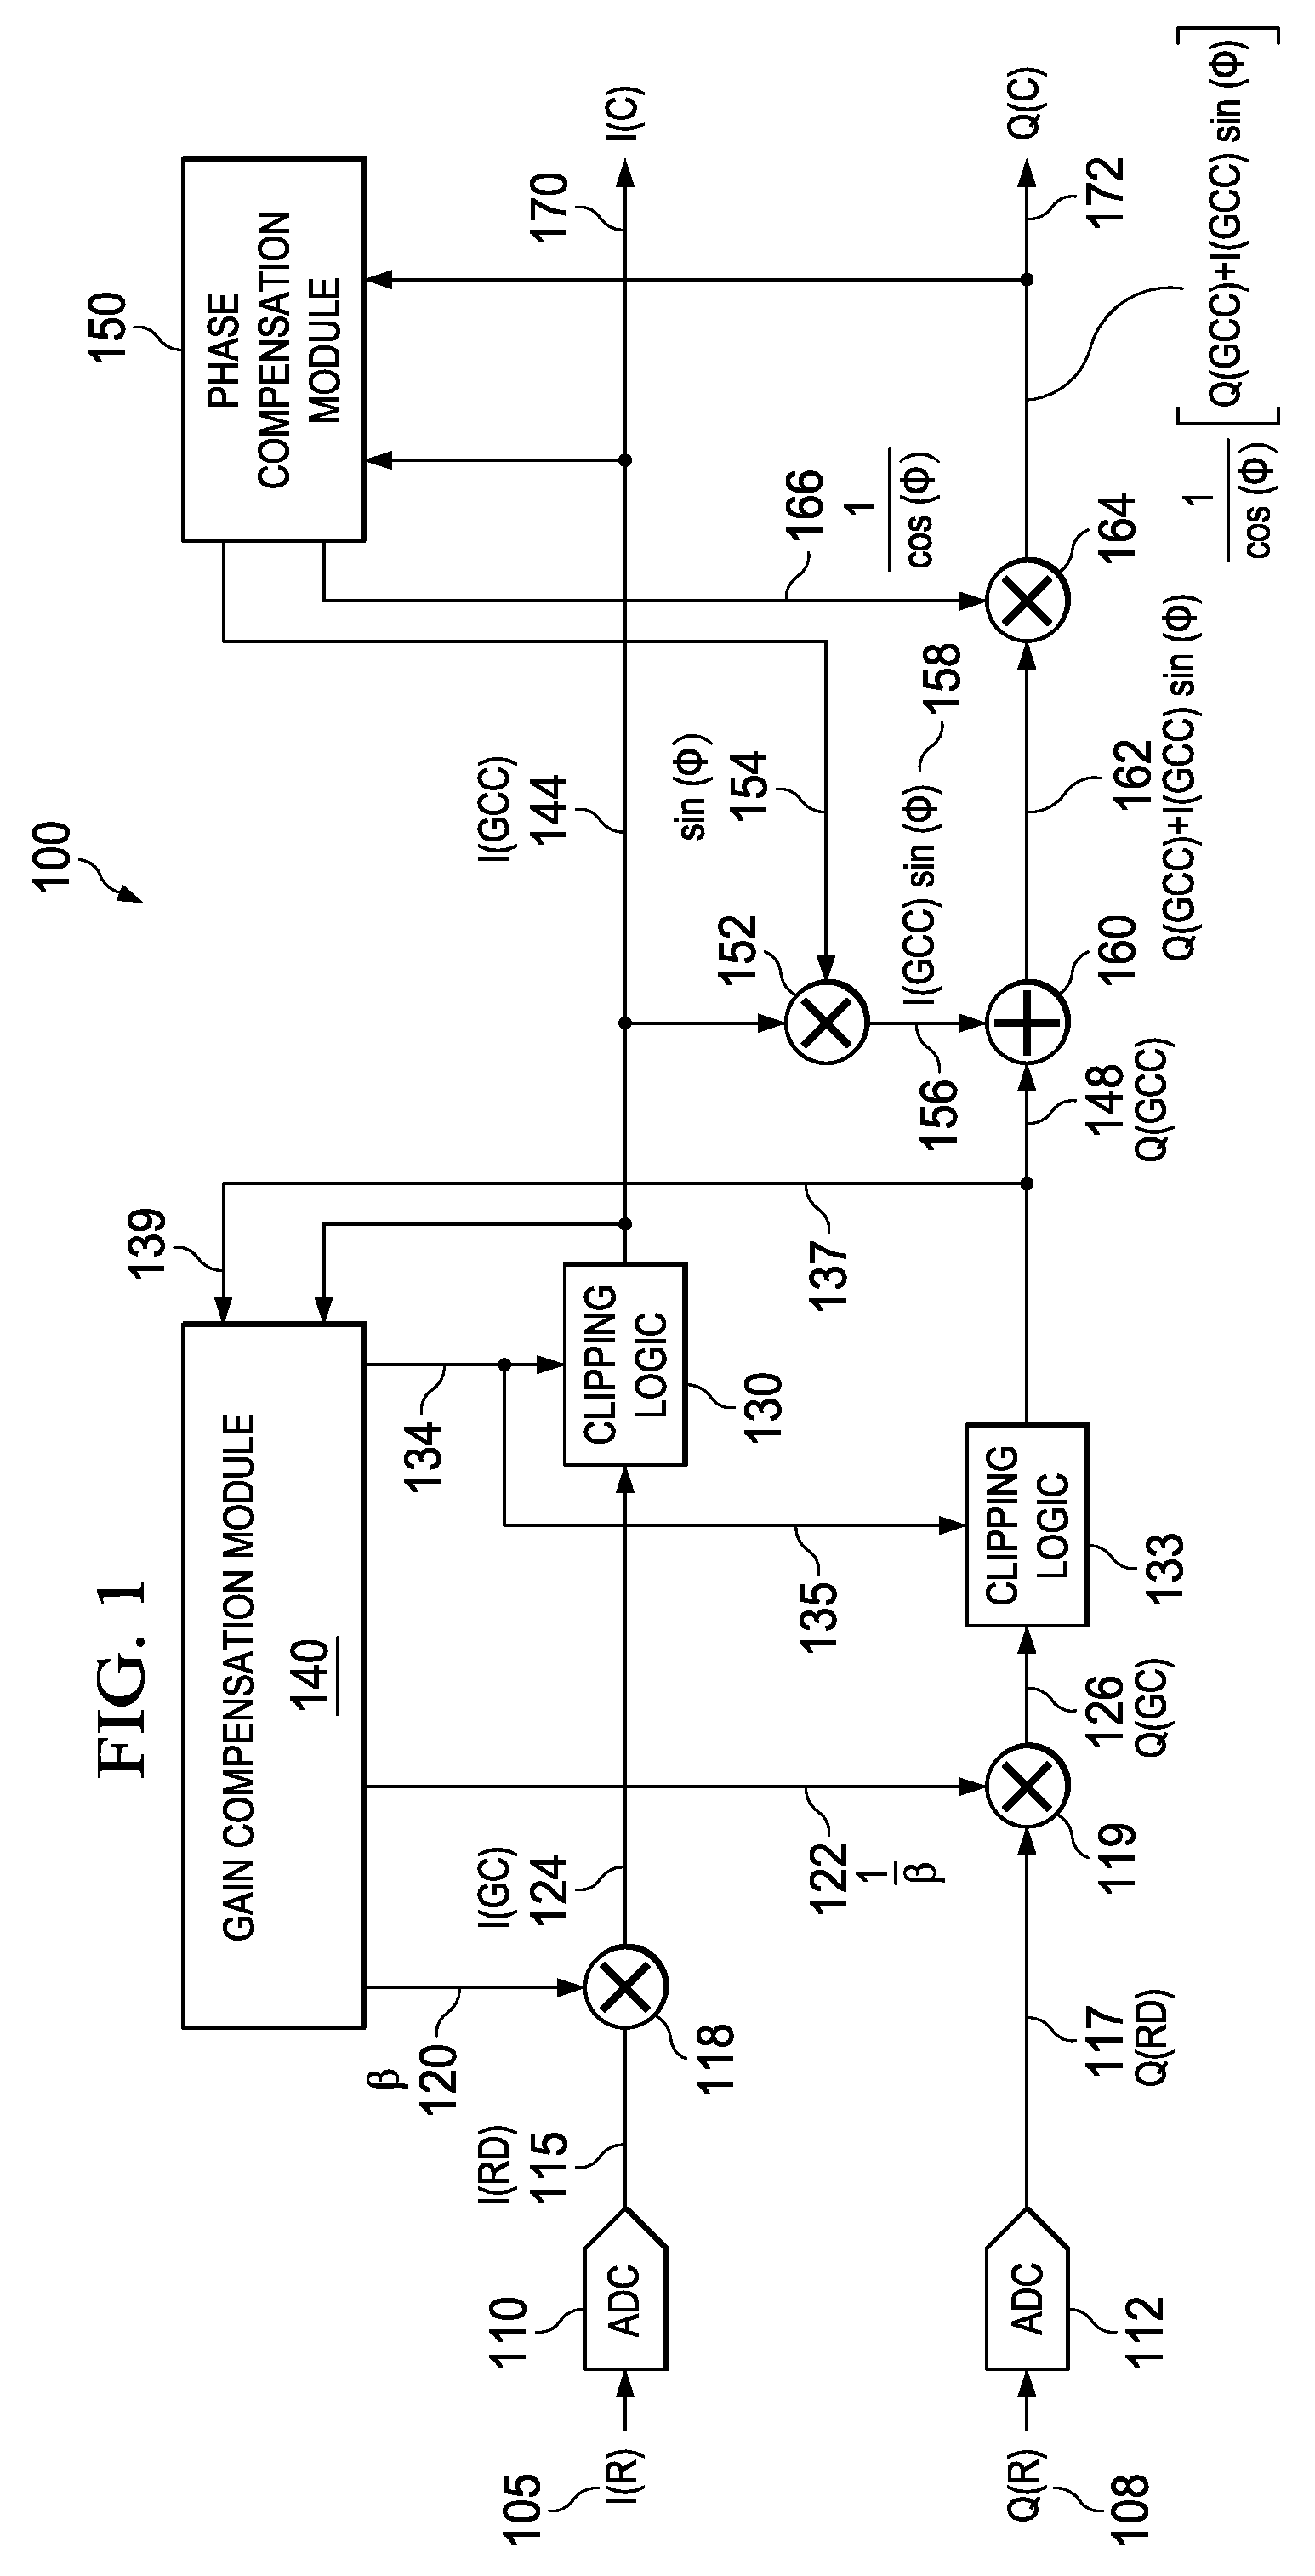 Blind I/Q mismatch compensation with receiver non-linearity